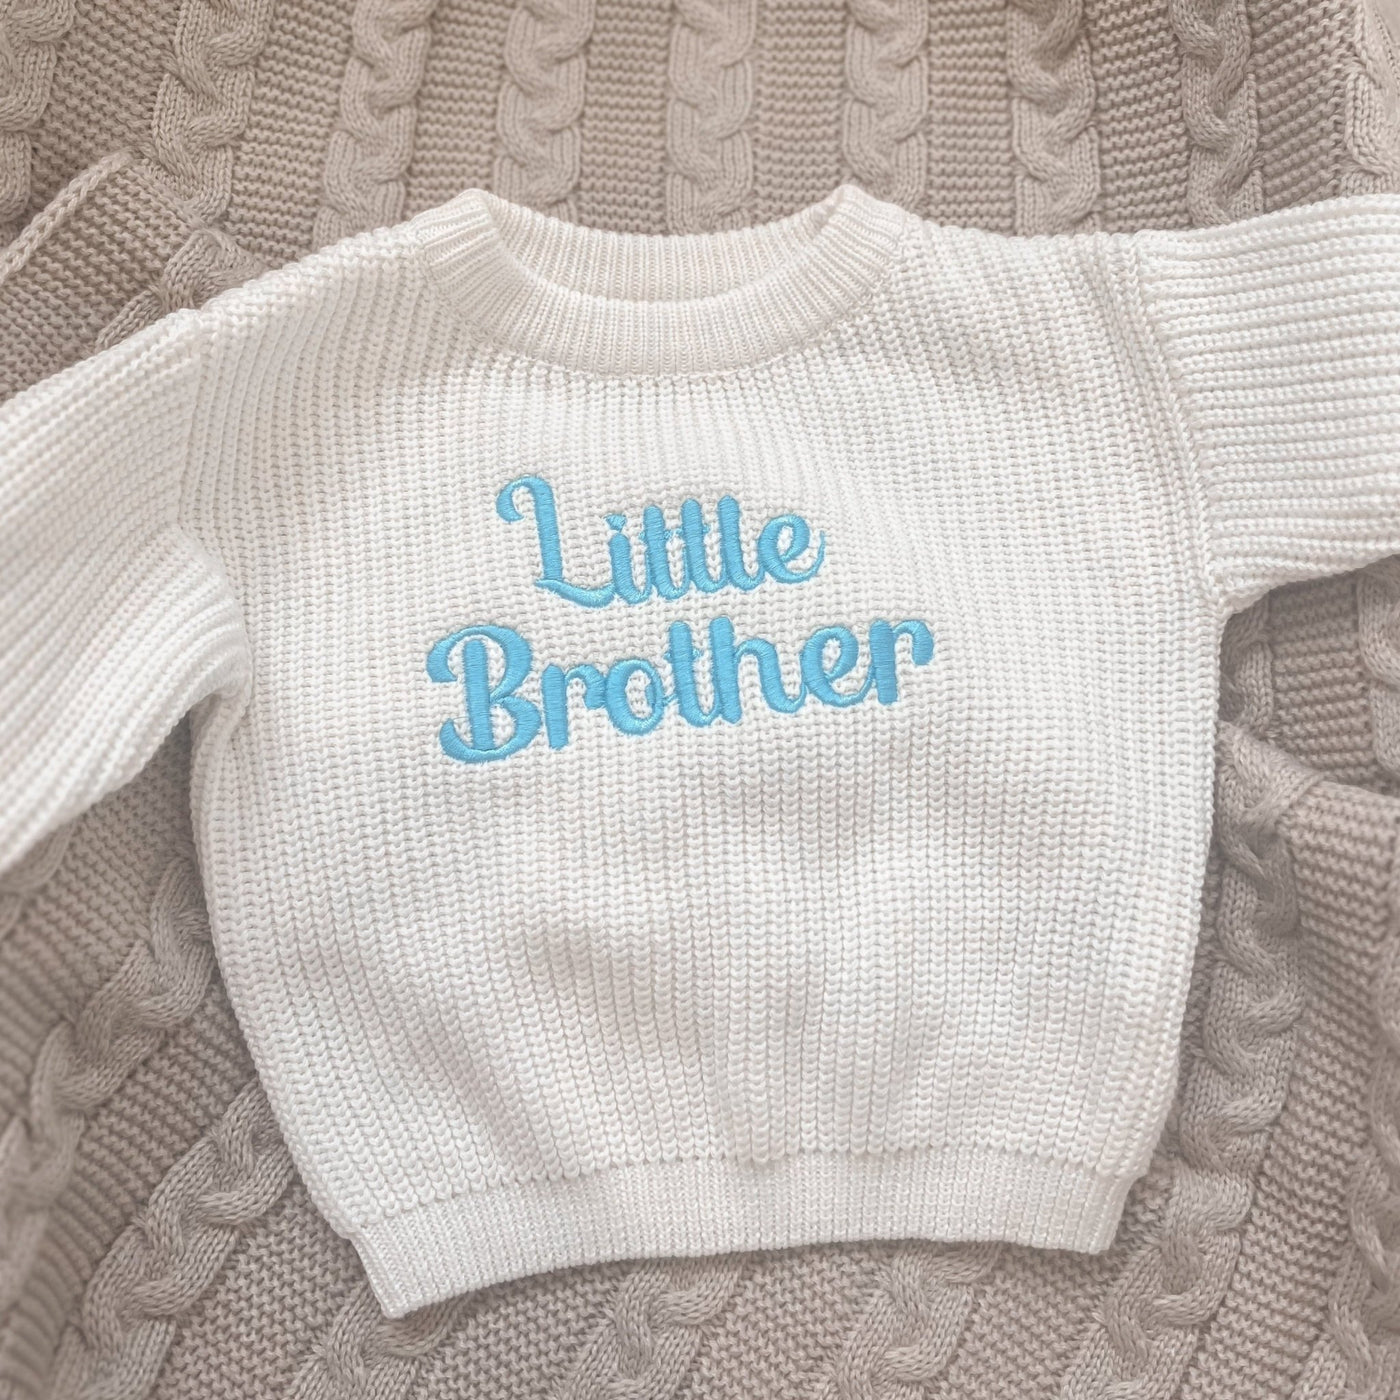 Little Brother Knitted Personalised Jumper - PRE ORDER - Amber and Noah